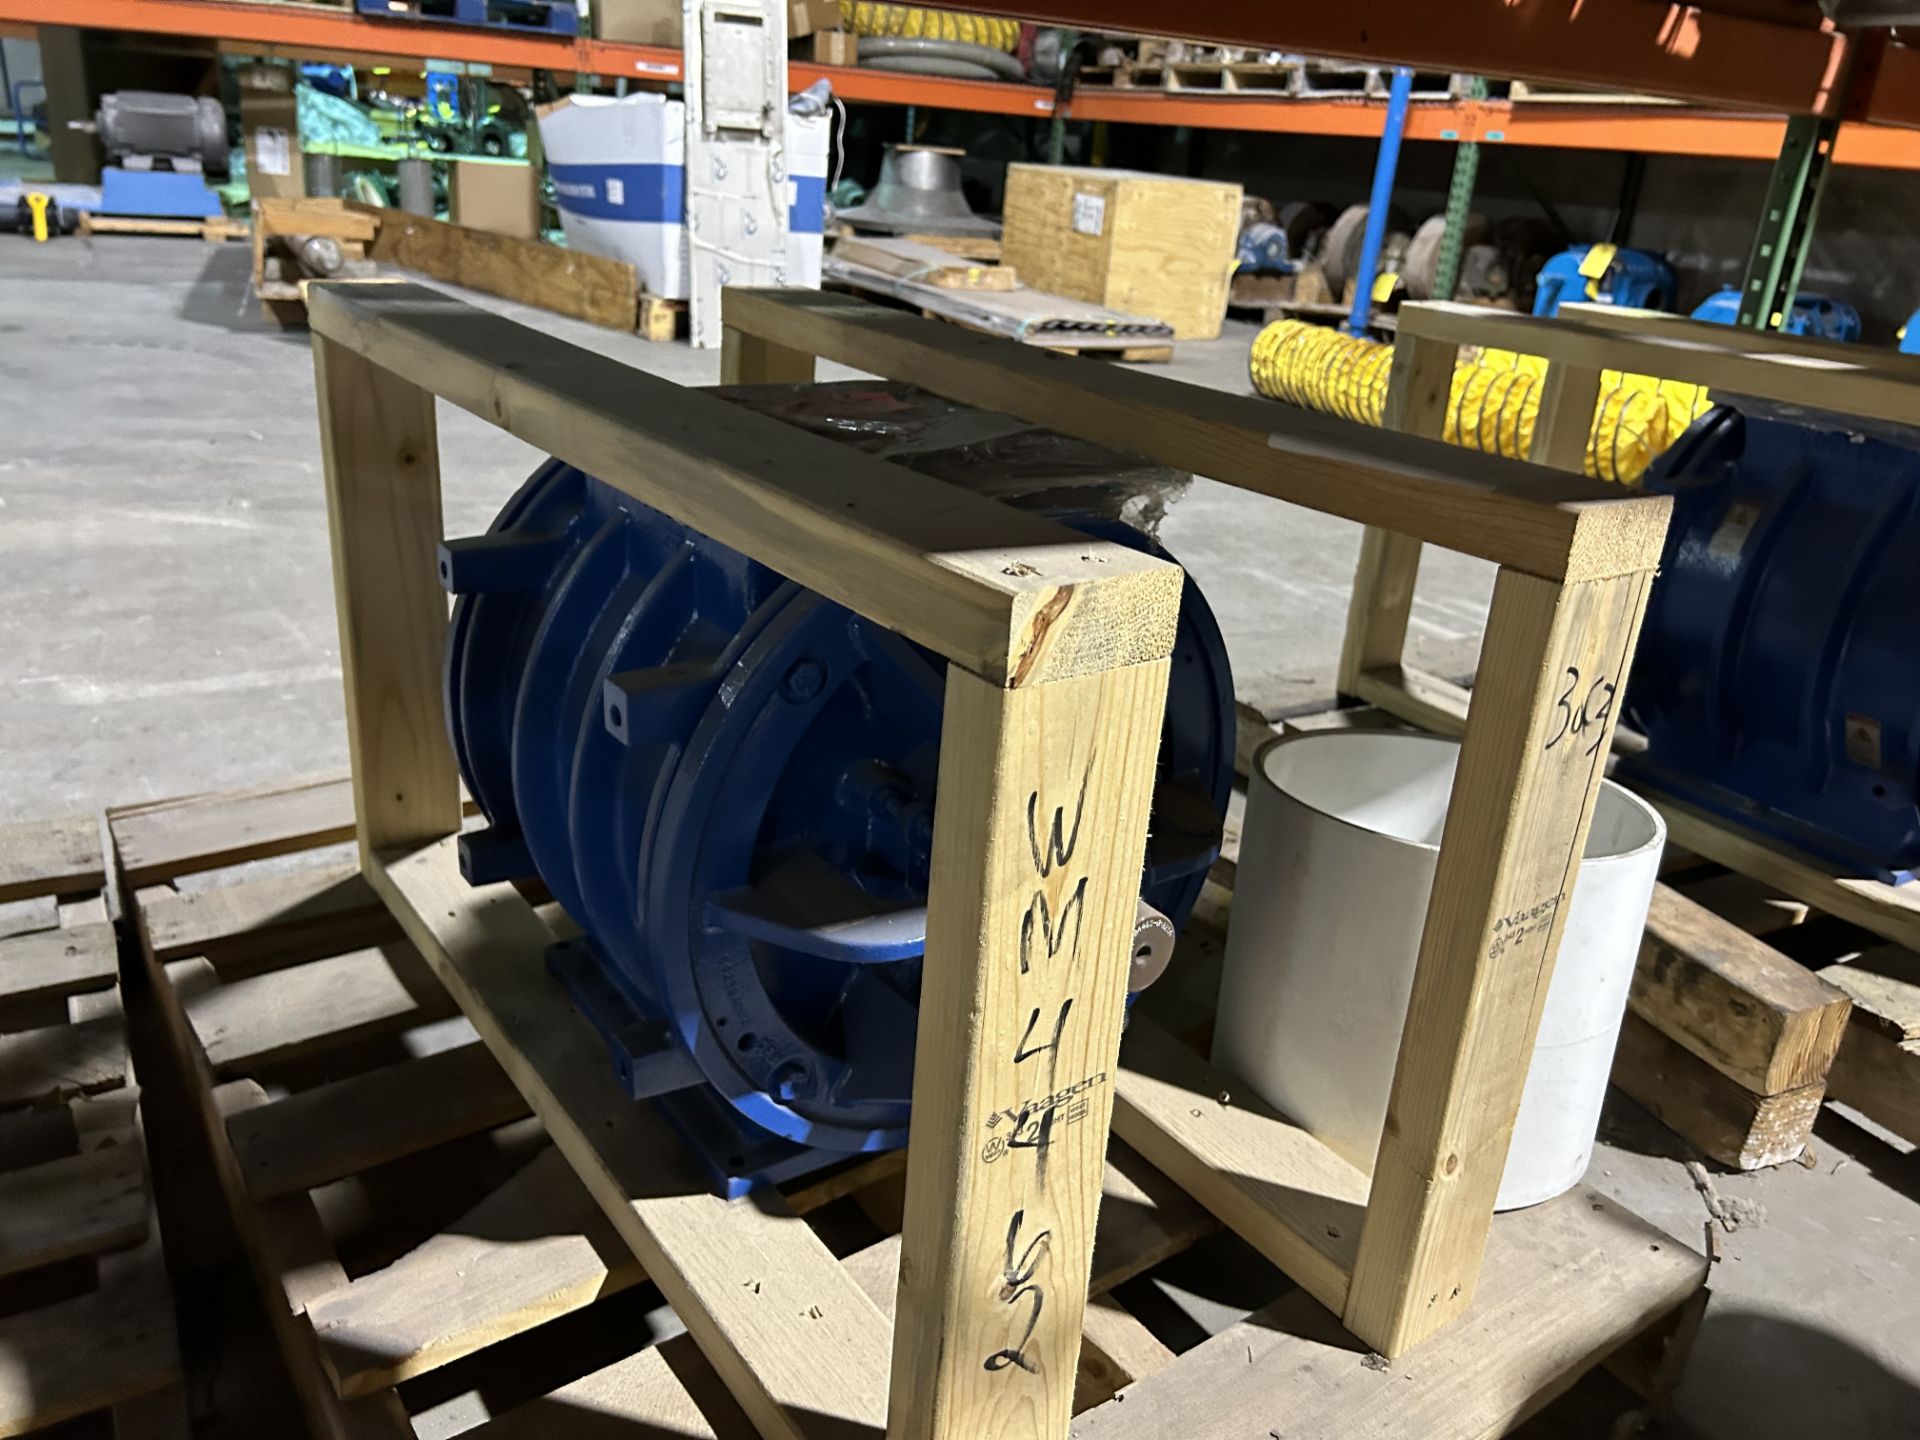 Andritz Rotary Valve , Rigging & Loading Fee: $100 - Image 6 of 7